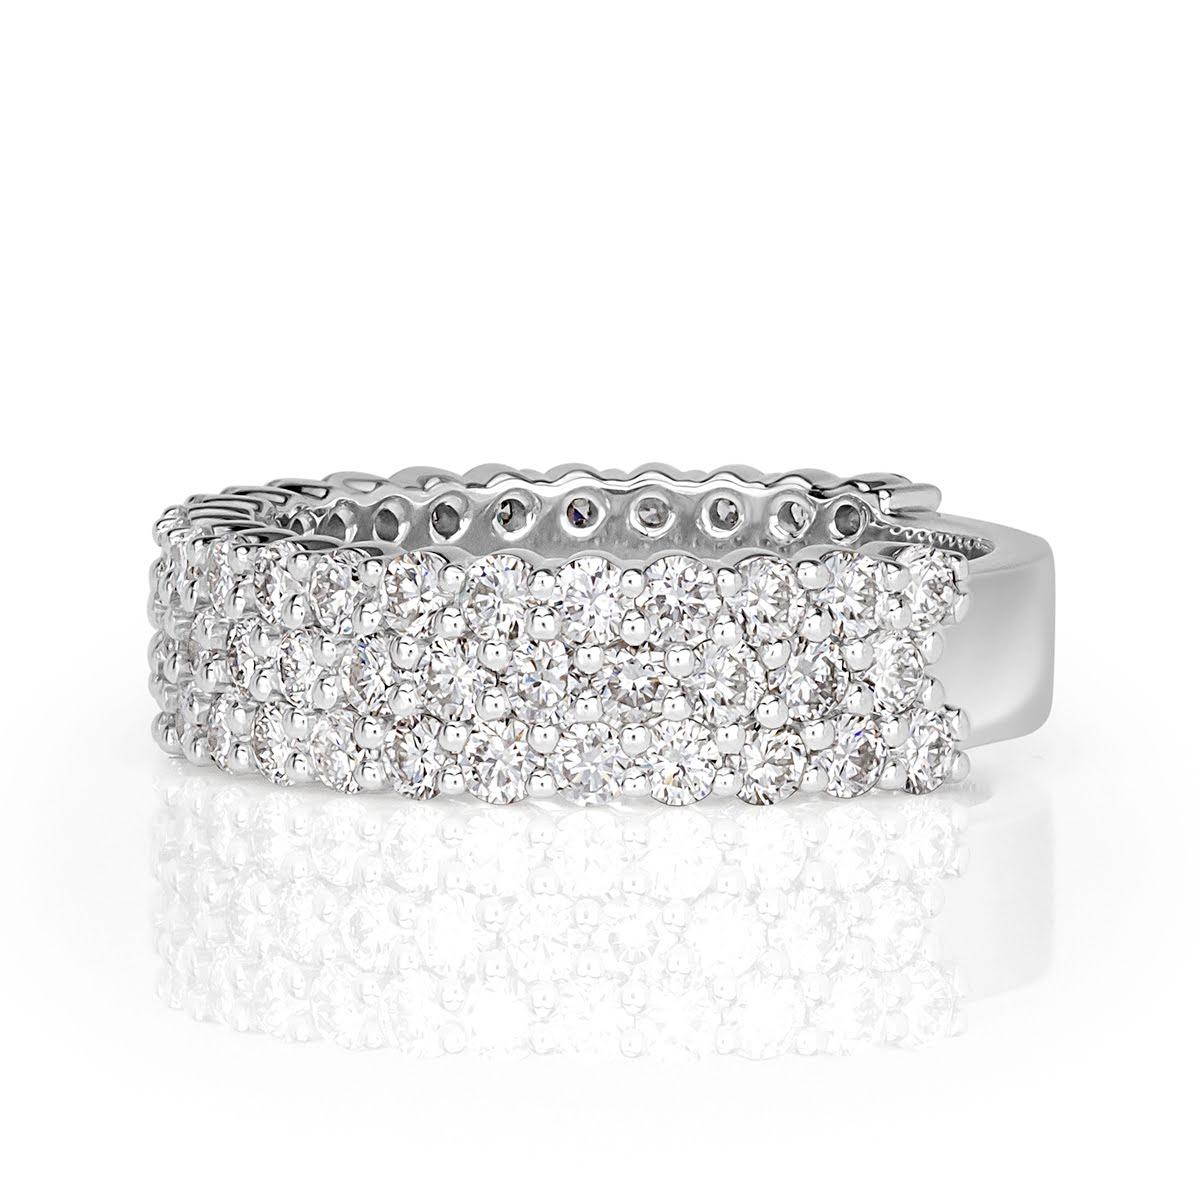 This shimmering, three-row diamond band showcases 1.85ct of seamlessly matched round brilliant cut diamonds set in 18k white gold. The diamonds are graded at F-G in color, VS1-VS2 in clarity.